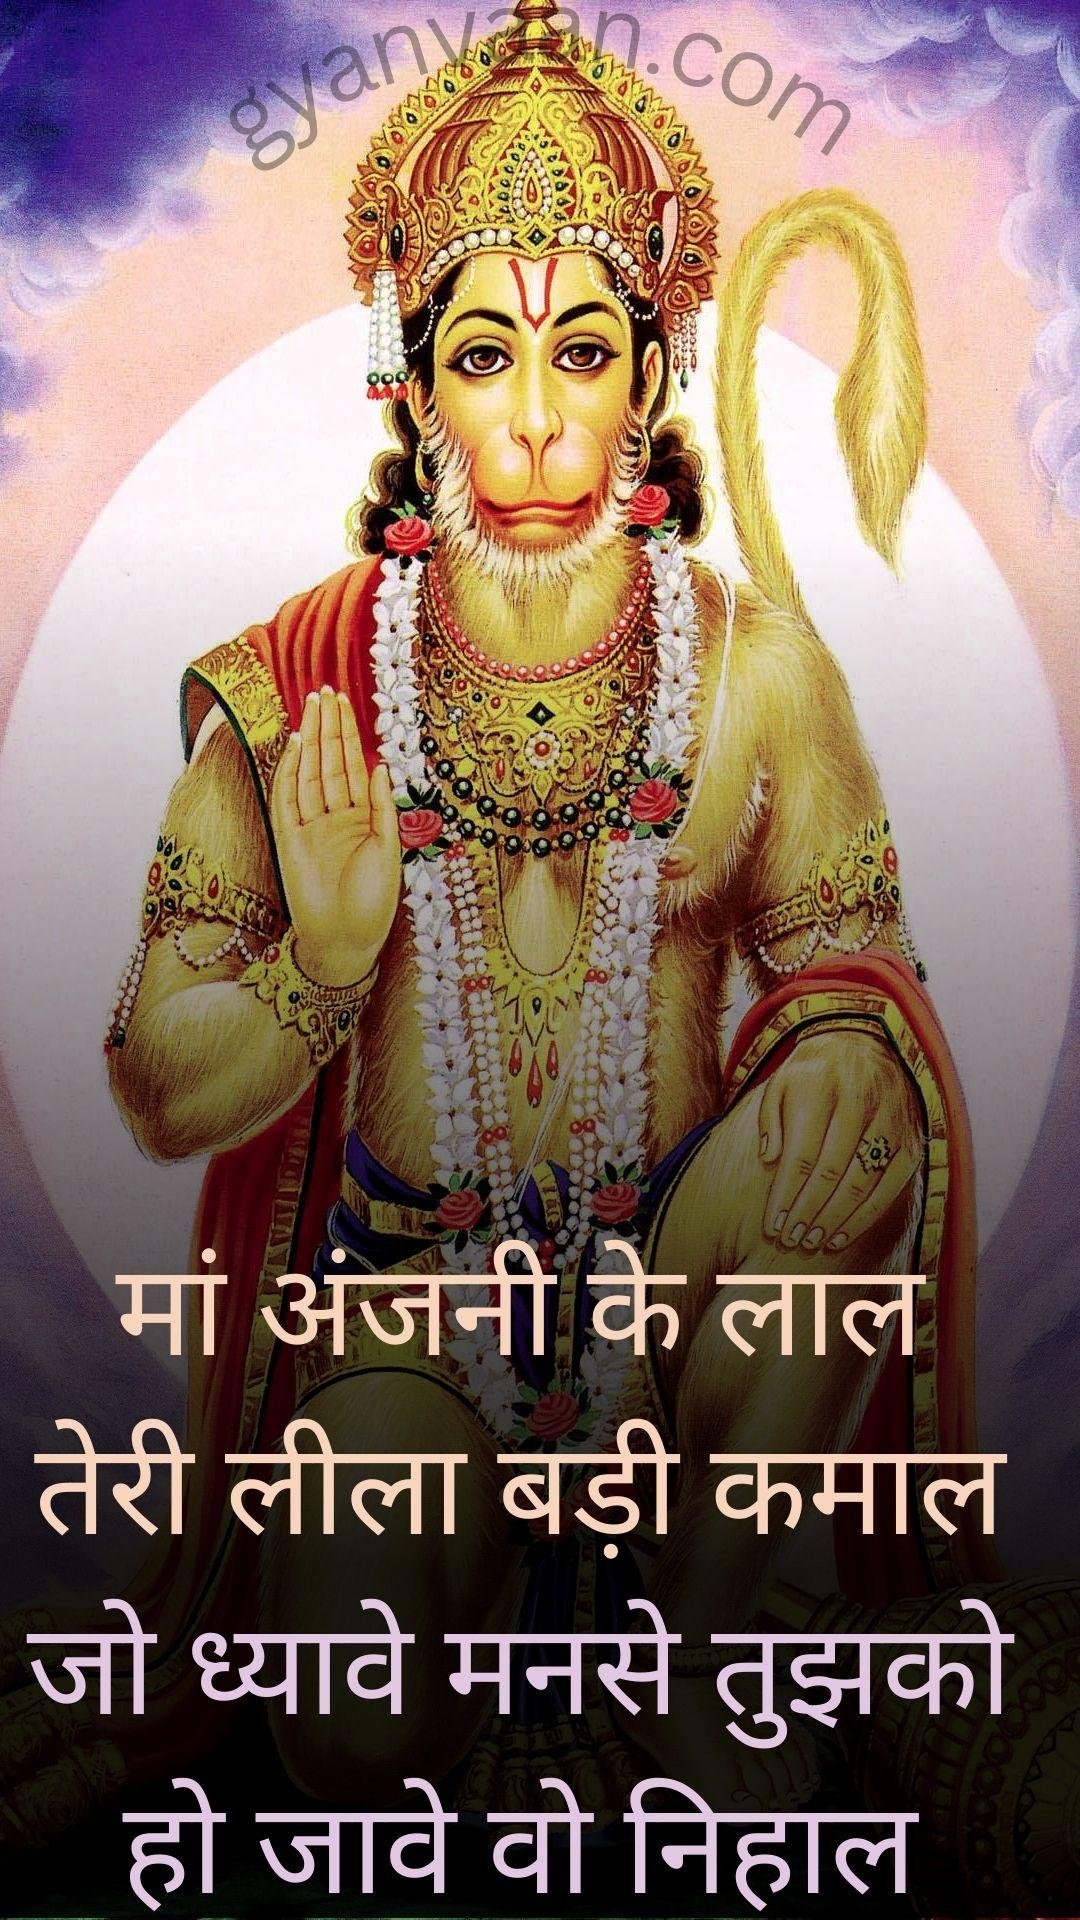 God Hanumaan Ji Sit On The Ground And Giving Blessing With His Right Hand And There Is An Aura Behind Him - Good Morning God Images